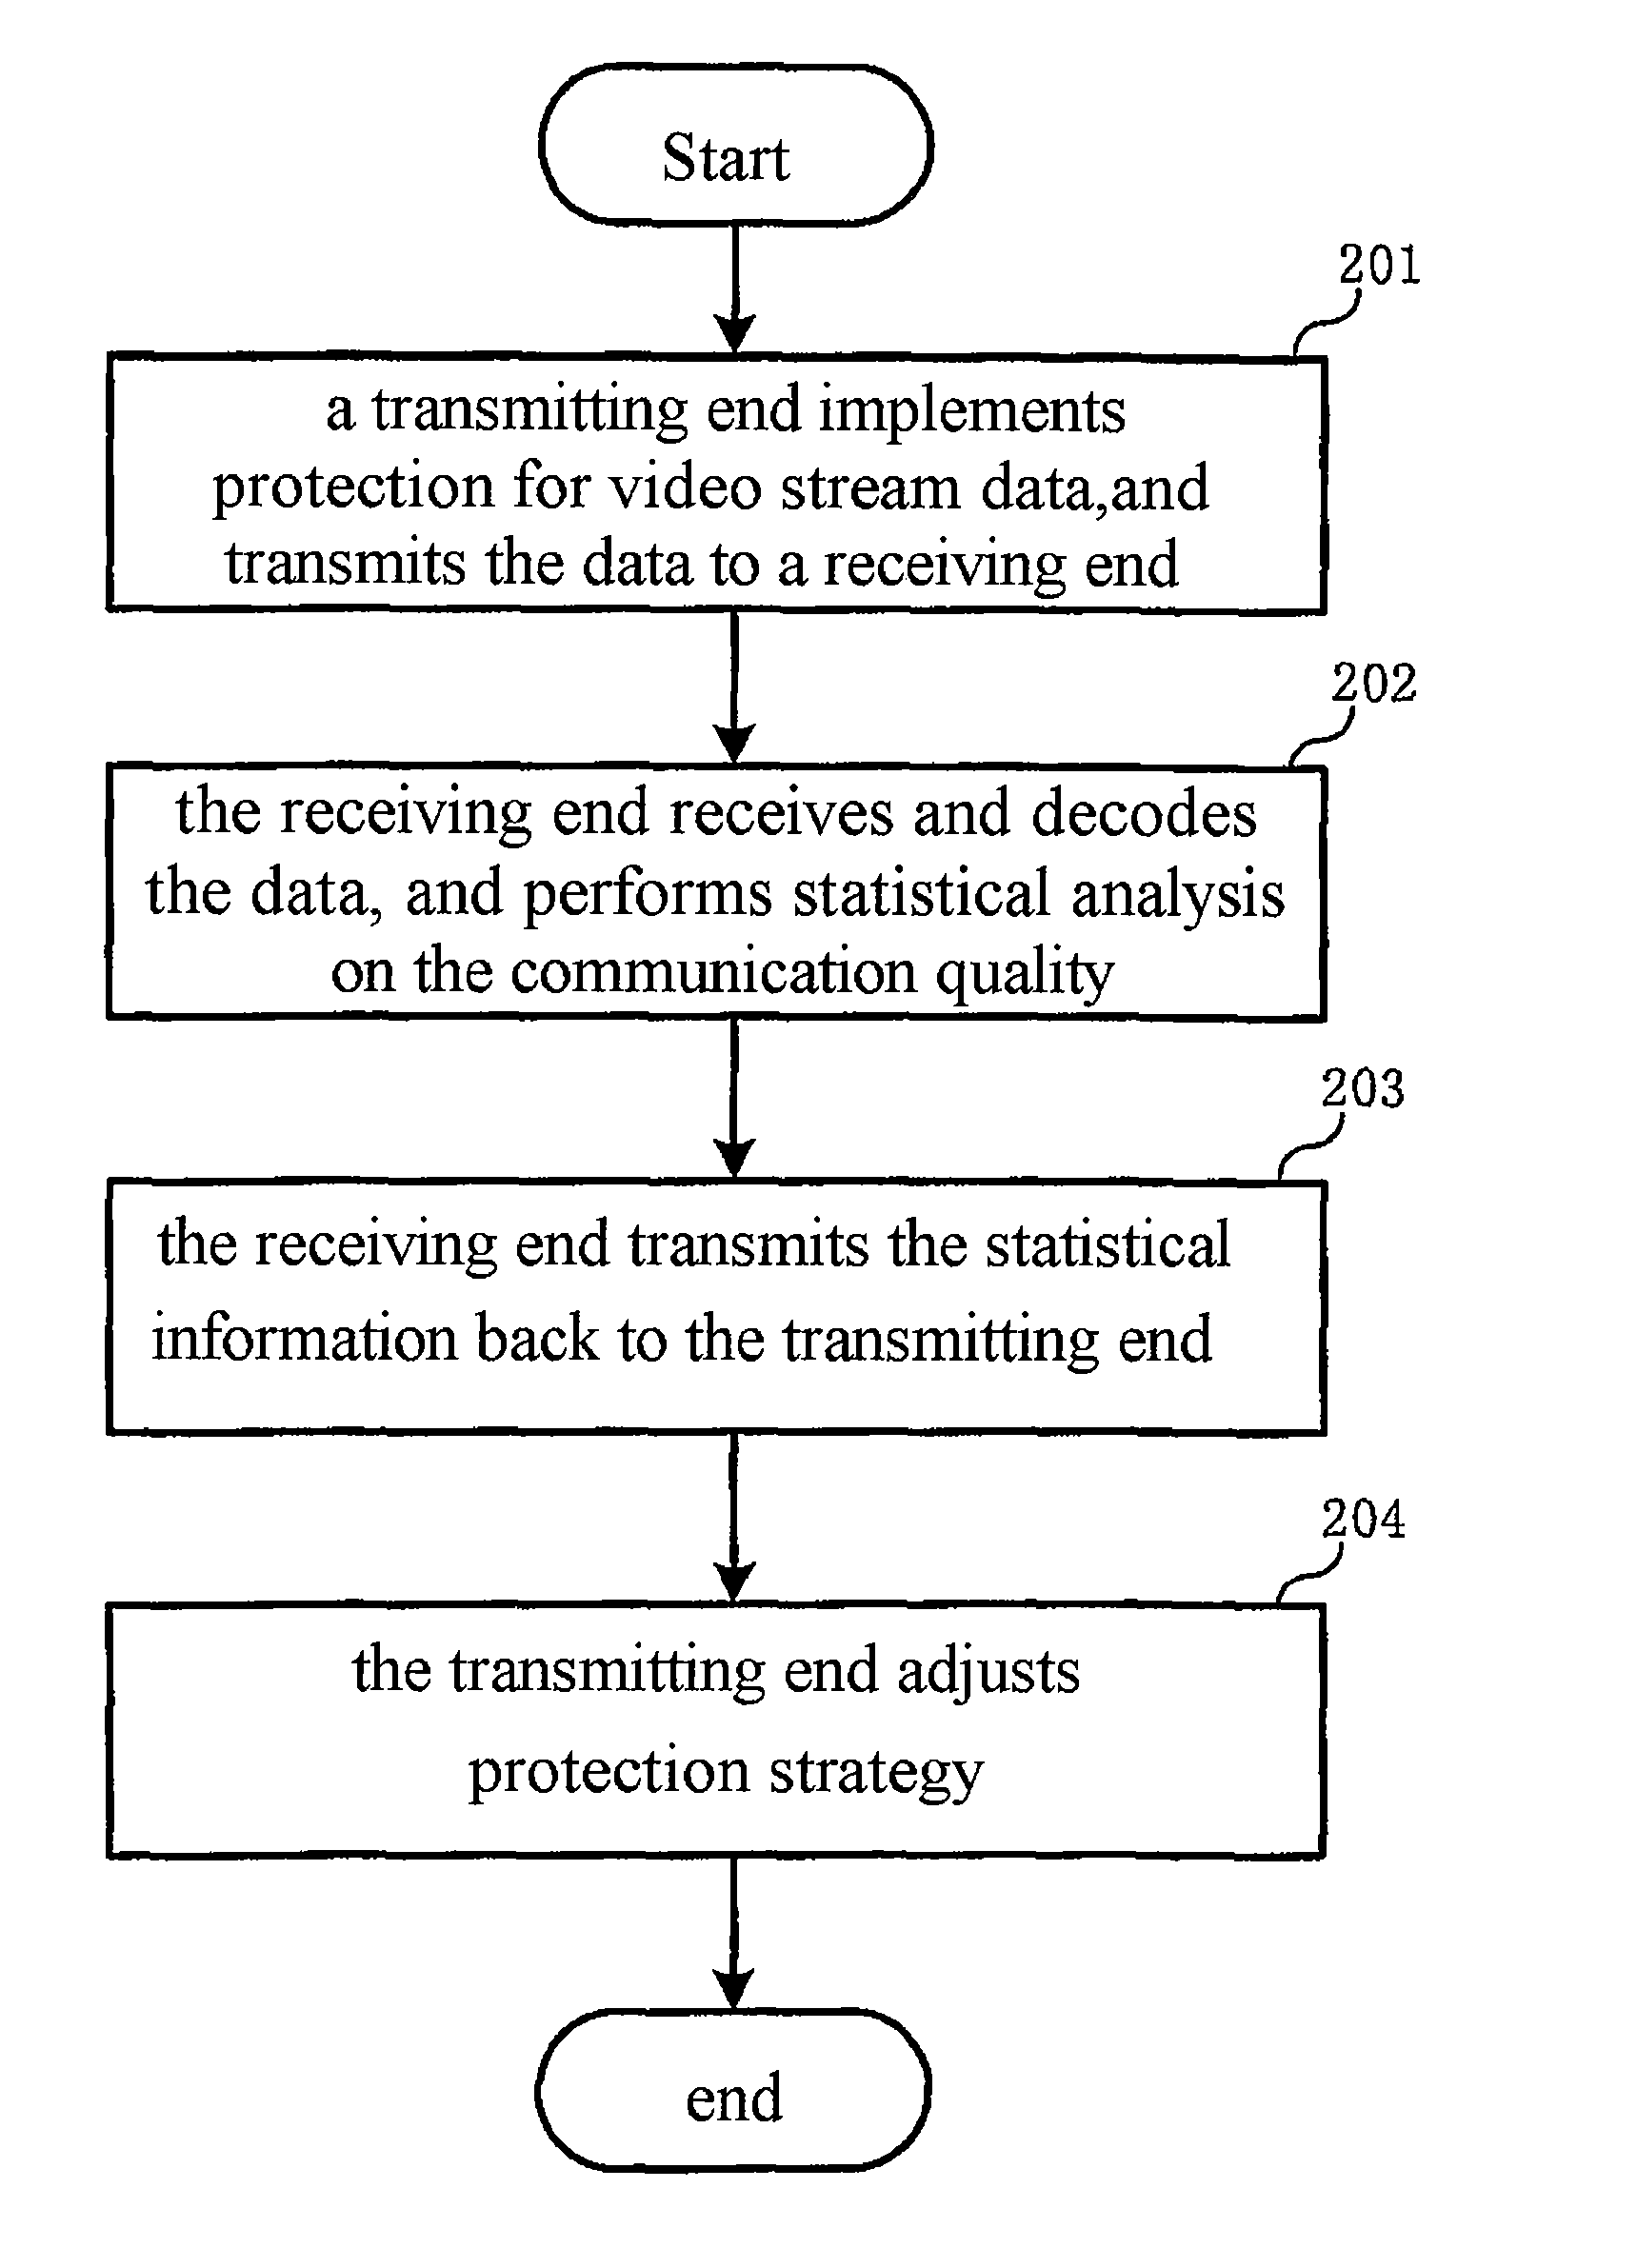 Method for protecting video transmission based on h.264